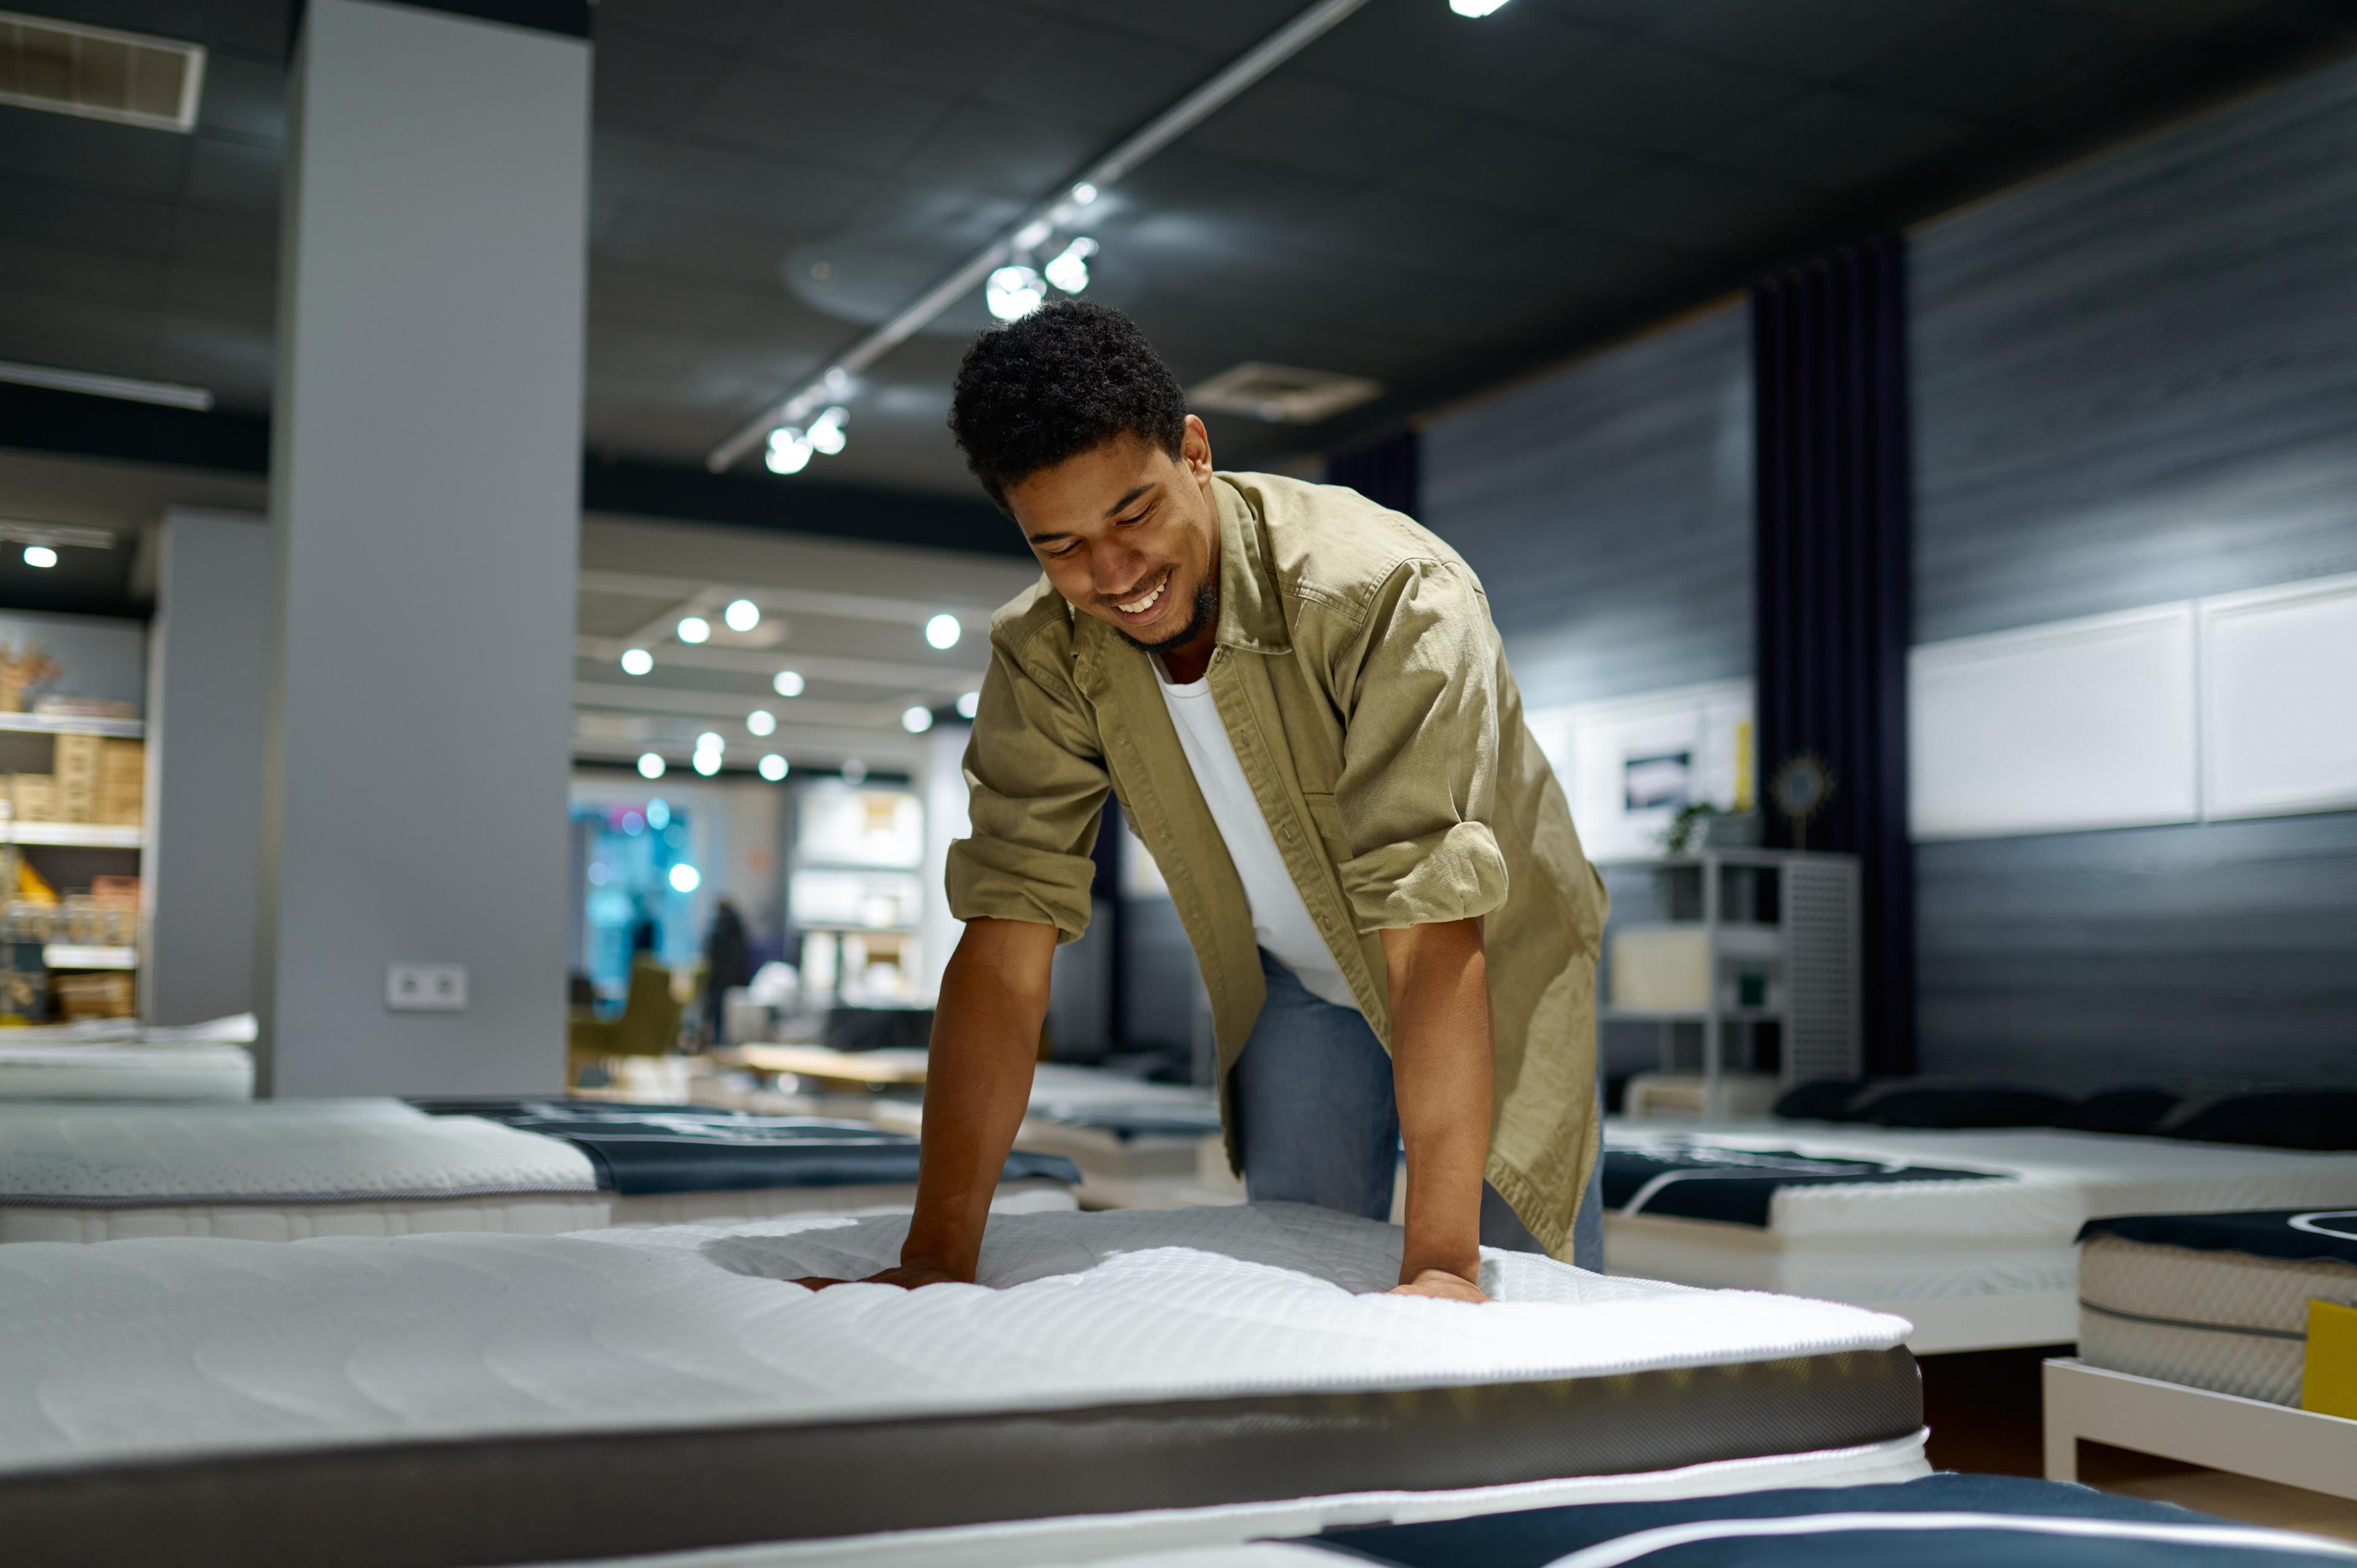 A customer checking out the material of a mattress in a store. He appears happy with the mattress he found and is looking to shop using his lease approval amount.